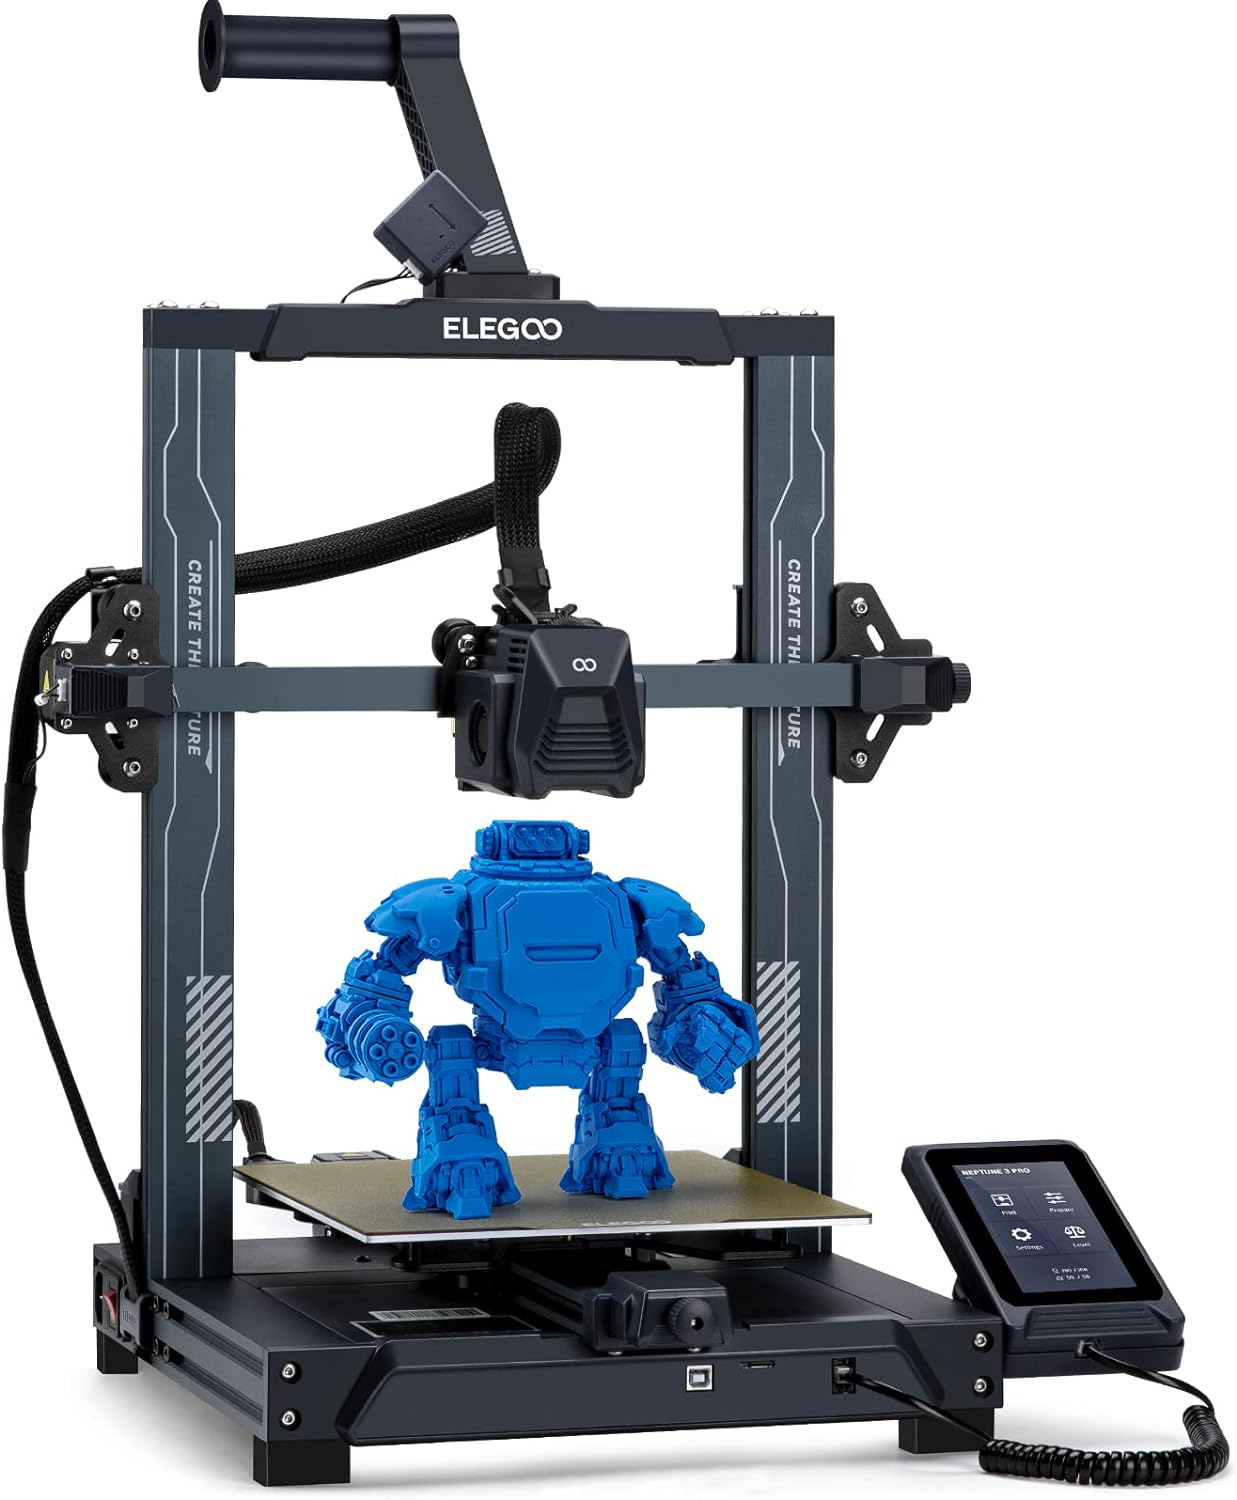 Bright blue robot model being printed on an Elegoo Neptune 3 Pro 3D printer, illustrating its status as one of the best 3D printers for beginners with its detailed printing capability and user-friendly controls